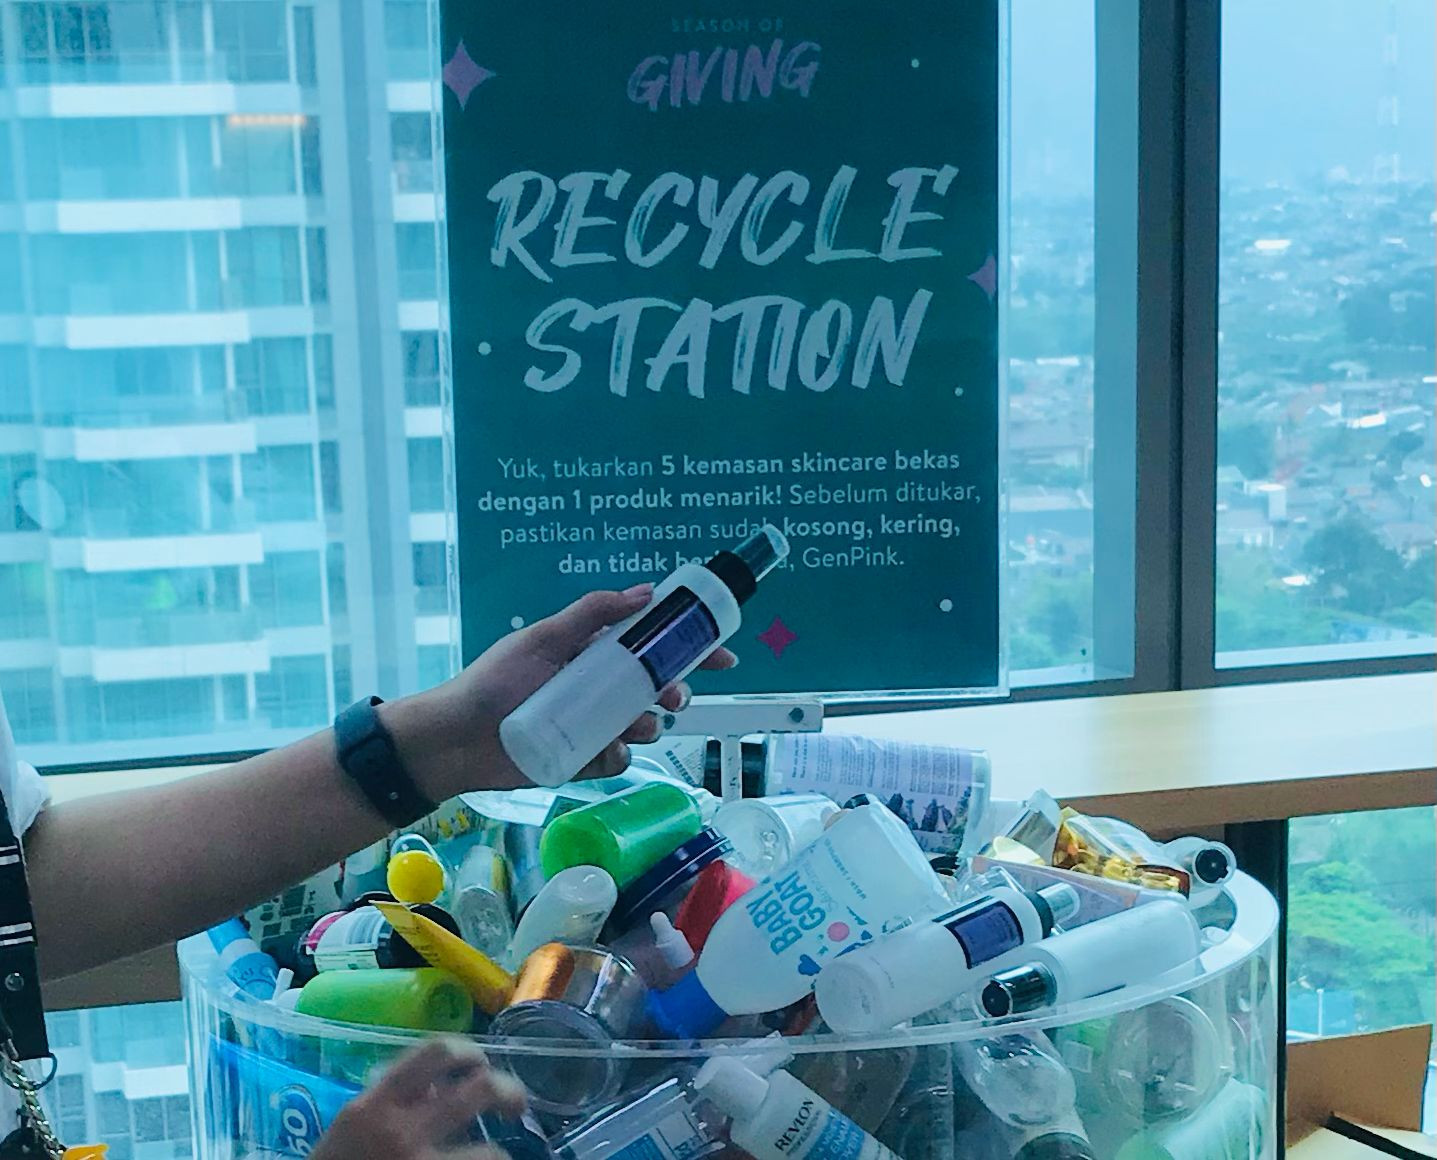 Recycle Station. (Sociolla)